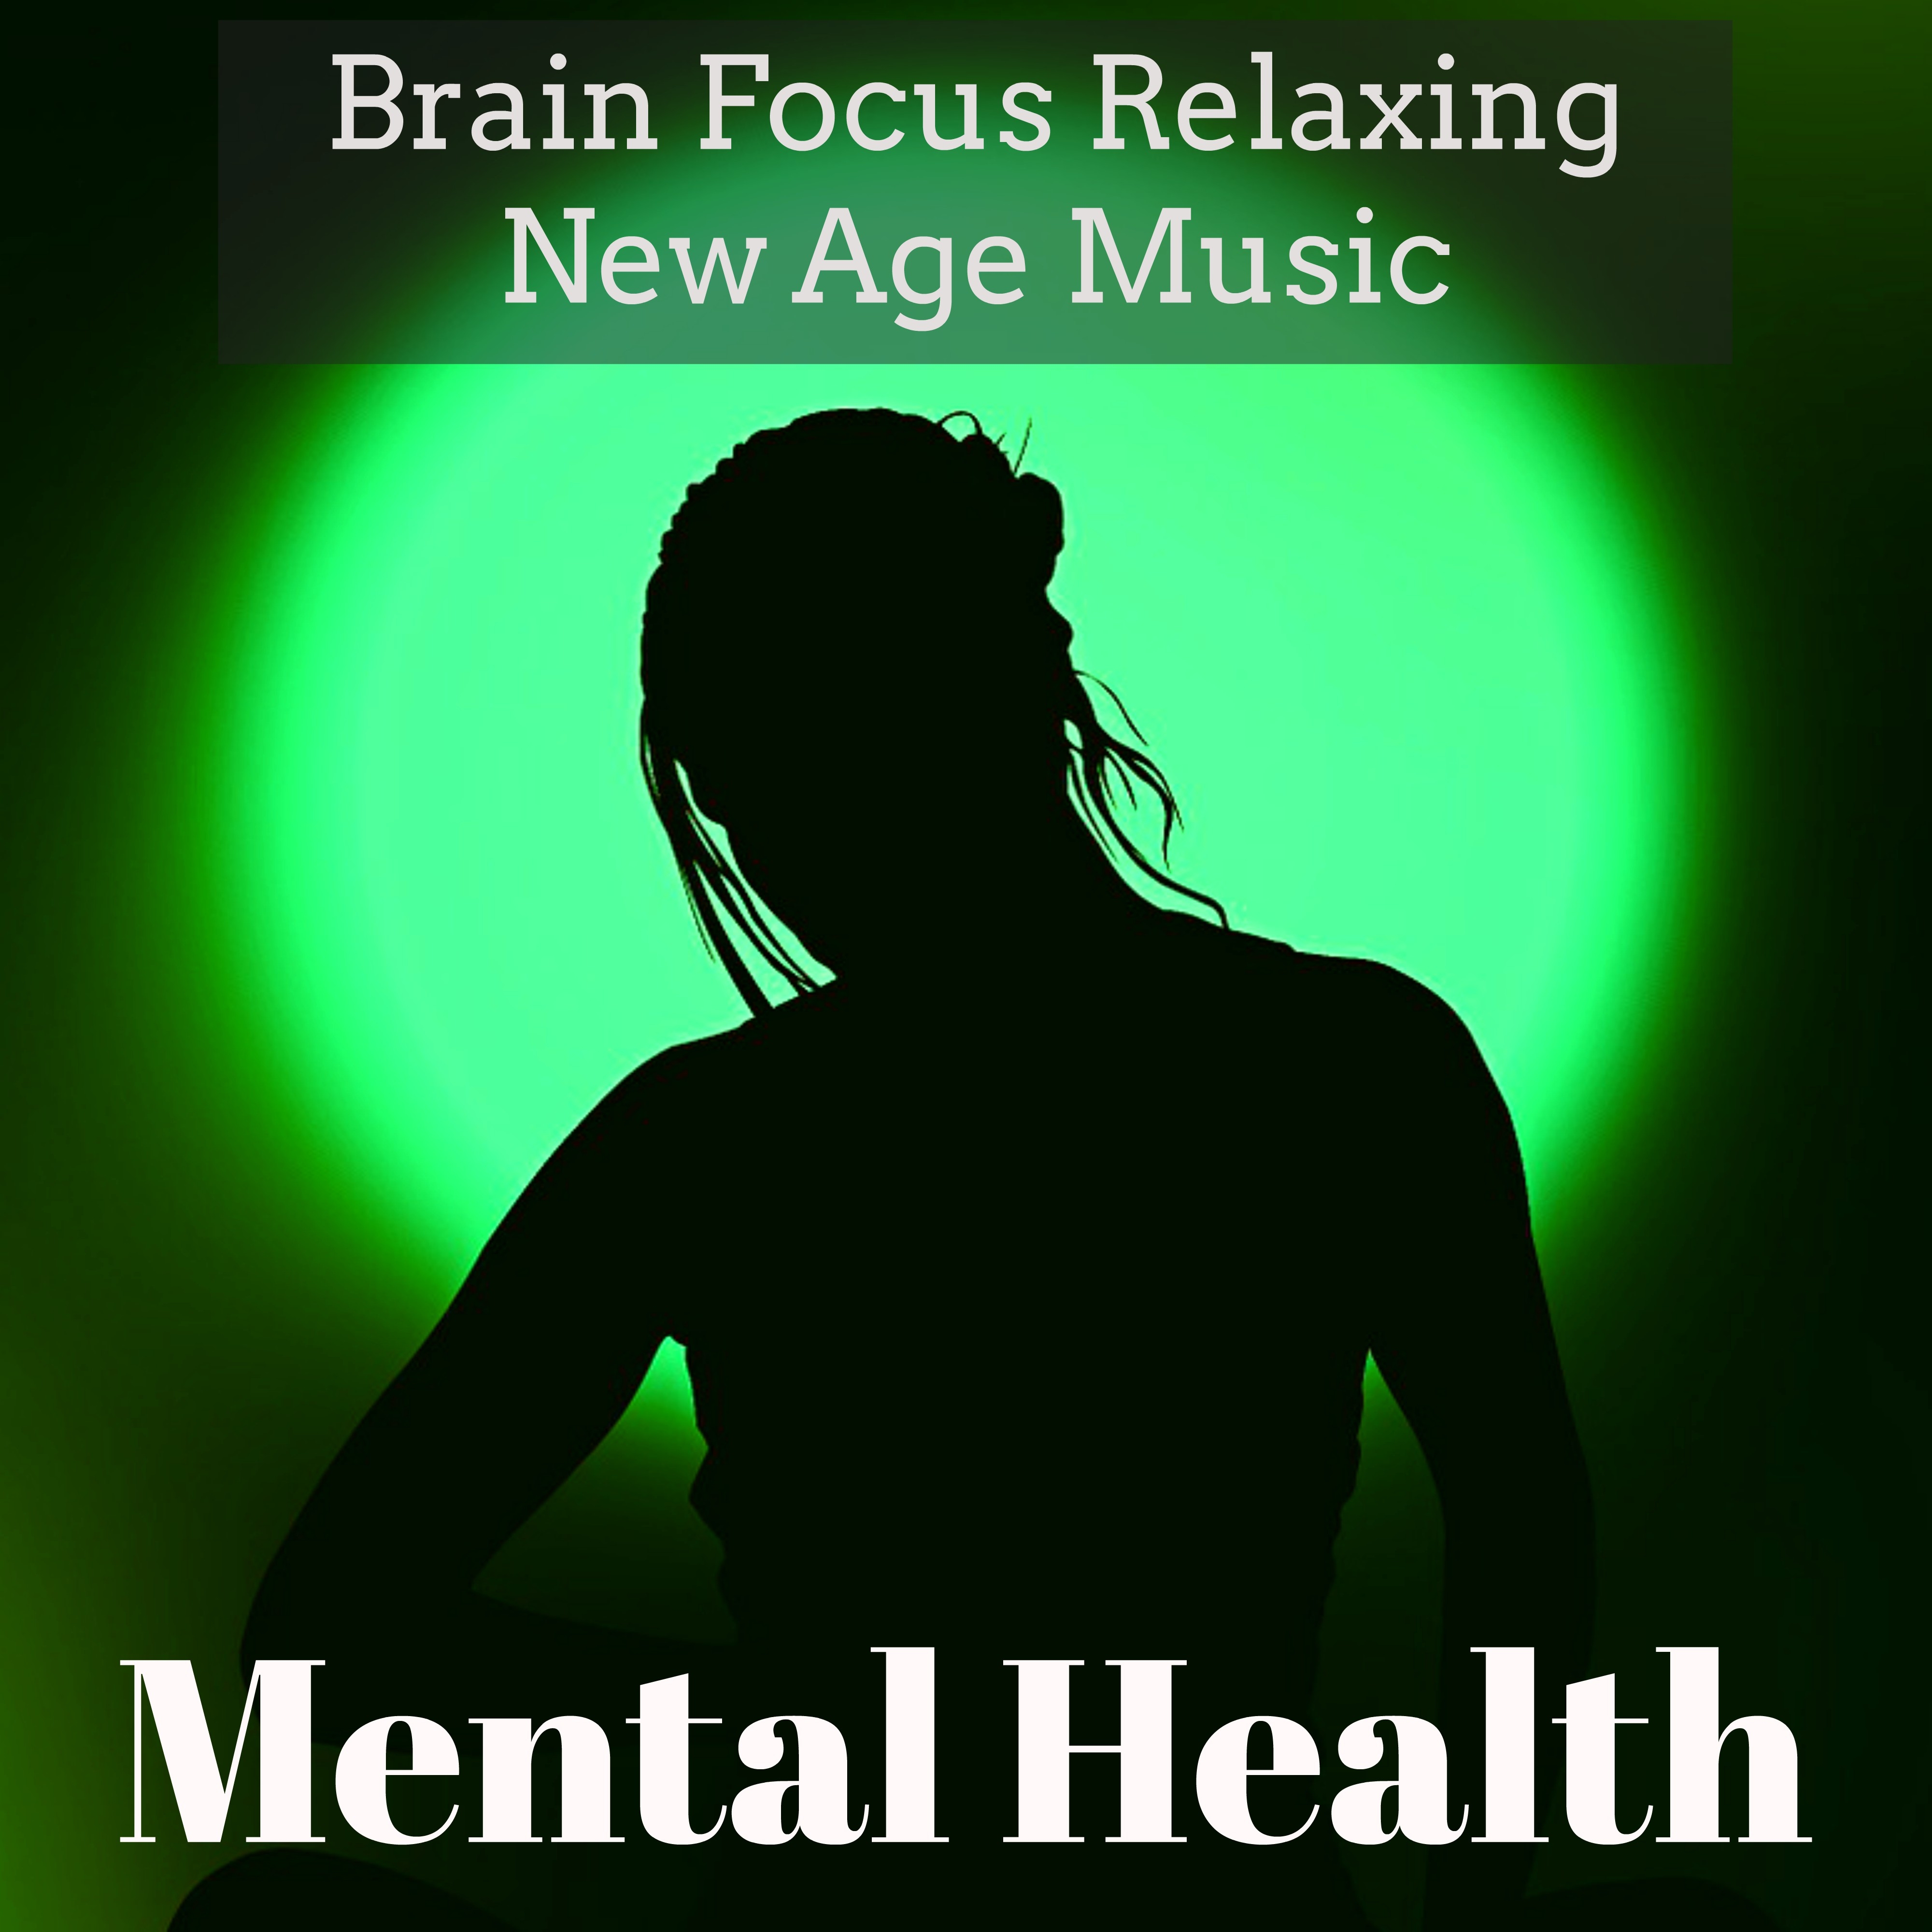 Mental Health - Brain Focus Relaxing New Age Music for Healing Meditation Chakra Balancing with Calming Instrumental Nature Sounds